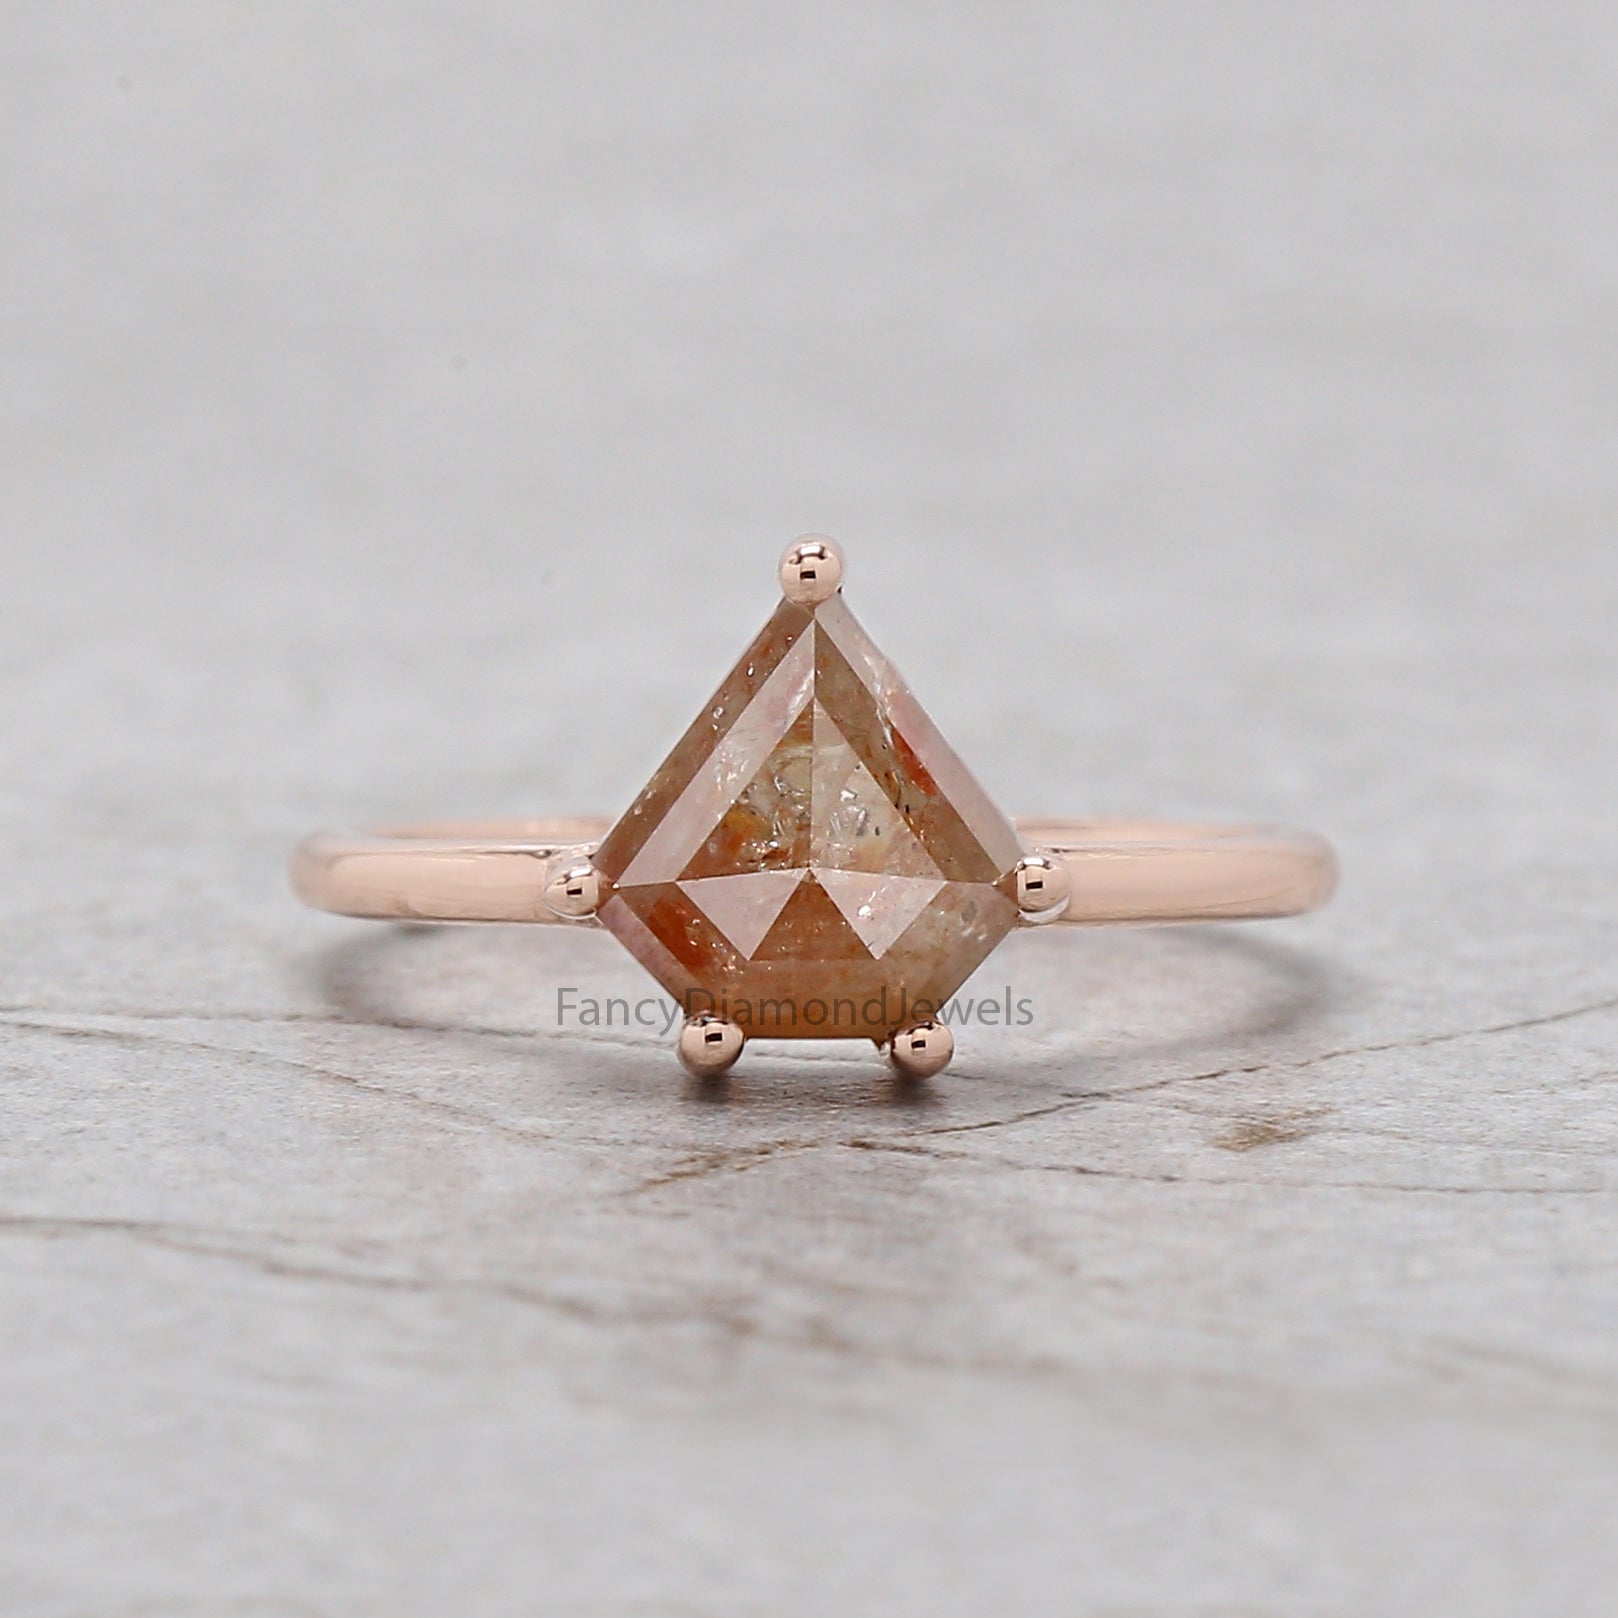 Shield Cut Brown Color Diamond Ring 2.30 Ct 8.50 MM Shield Shape Diamond Ring 14K Solid Rose Gold Shield Engagement Ring Gift For Her QN505